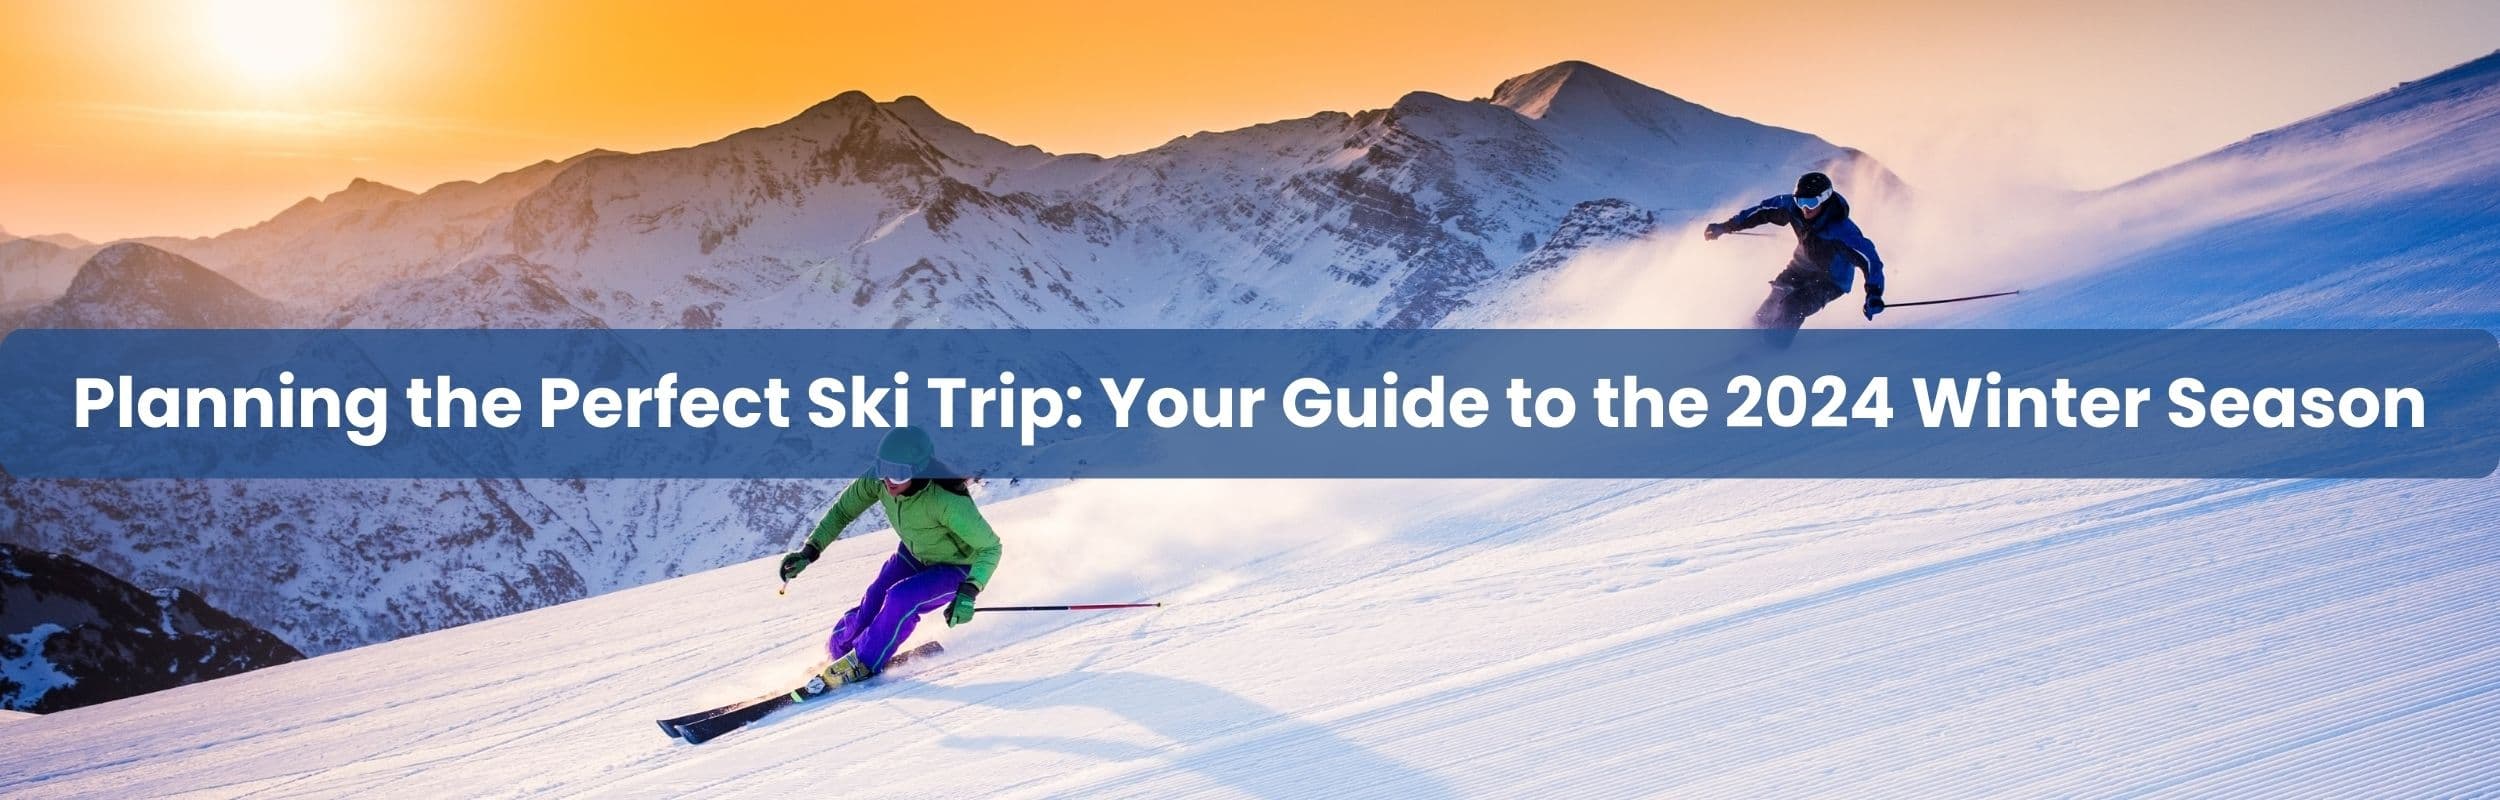 Planning the Perfect Ski Trip: Your Guide to the 2024 Winter Season